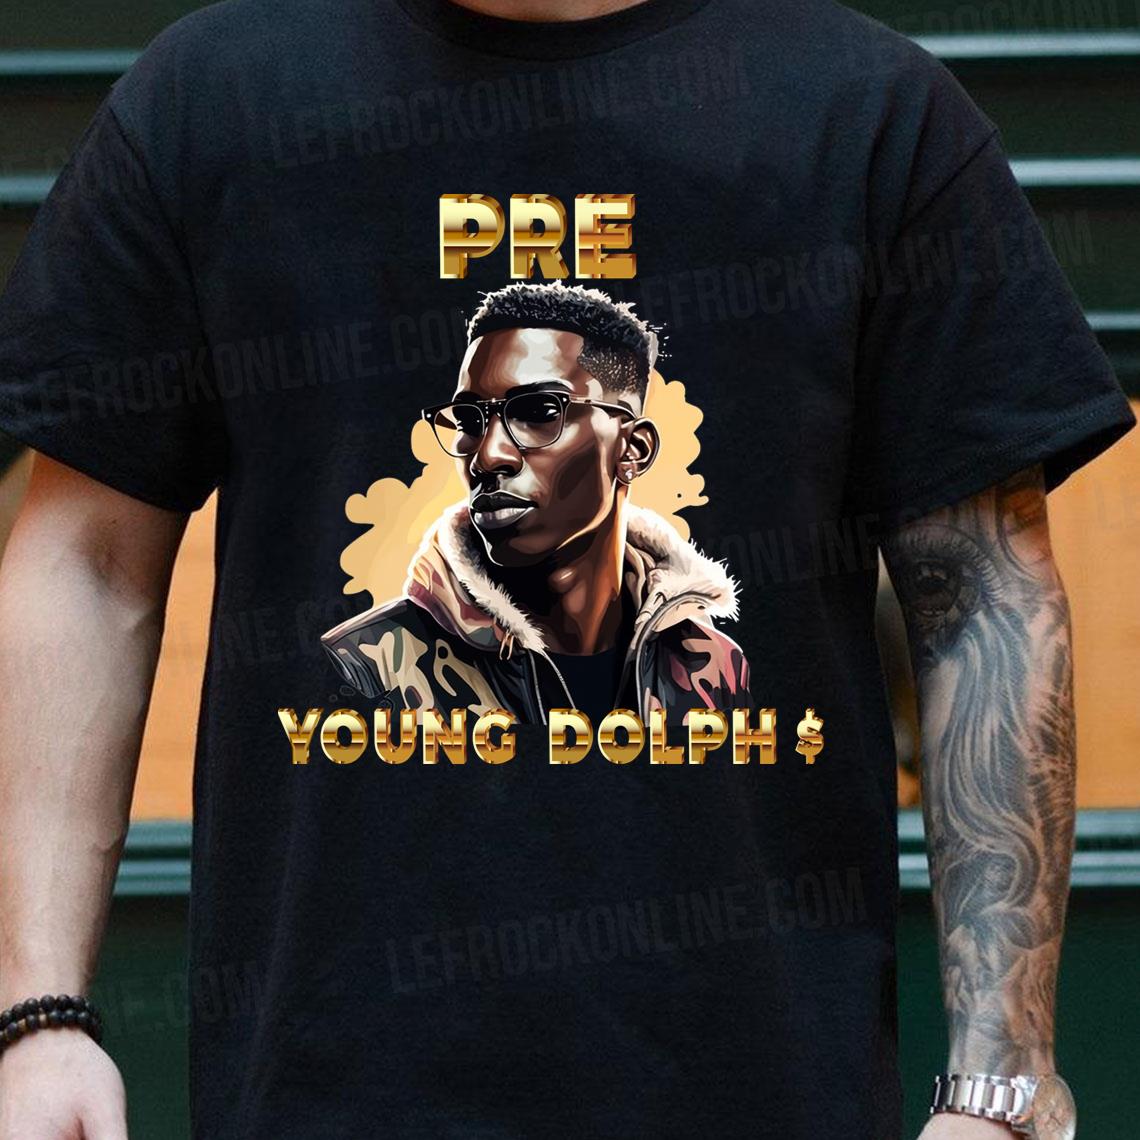 PRE Young Dolph The Legend Young Dolph T Shirt